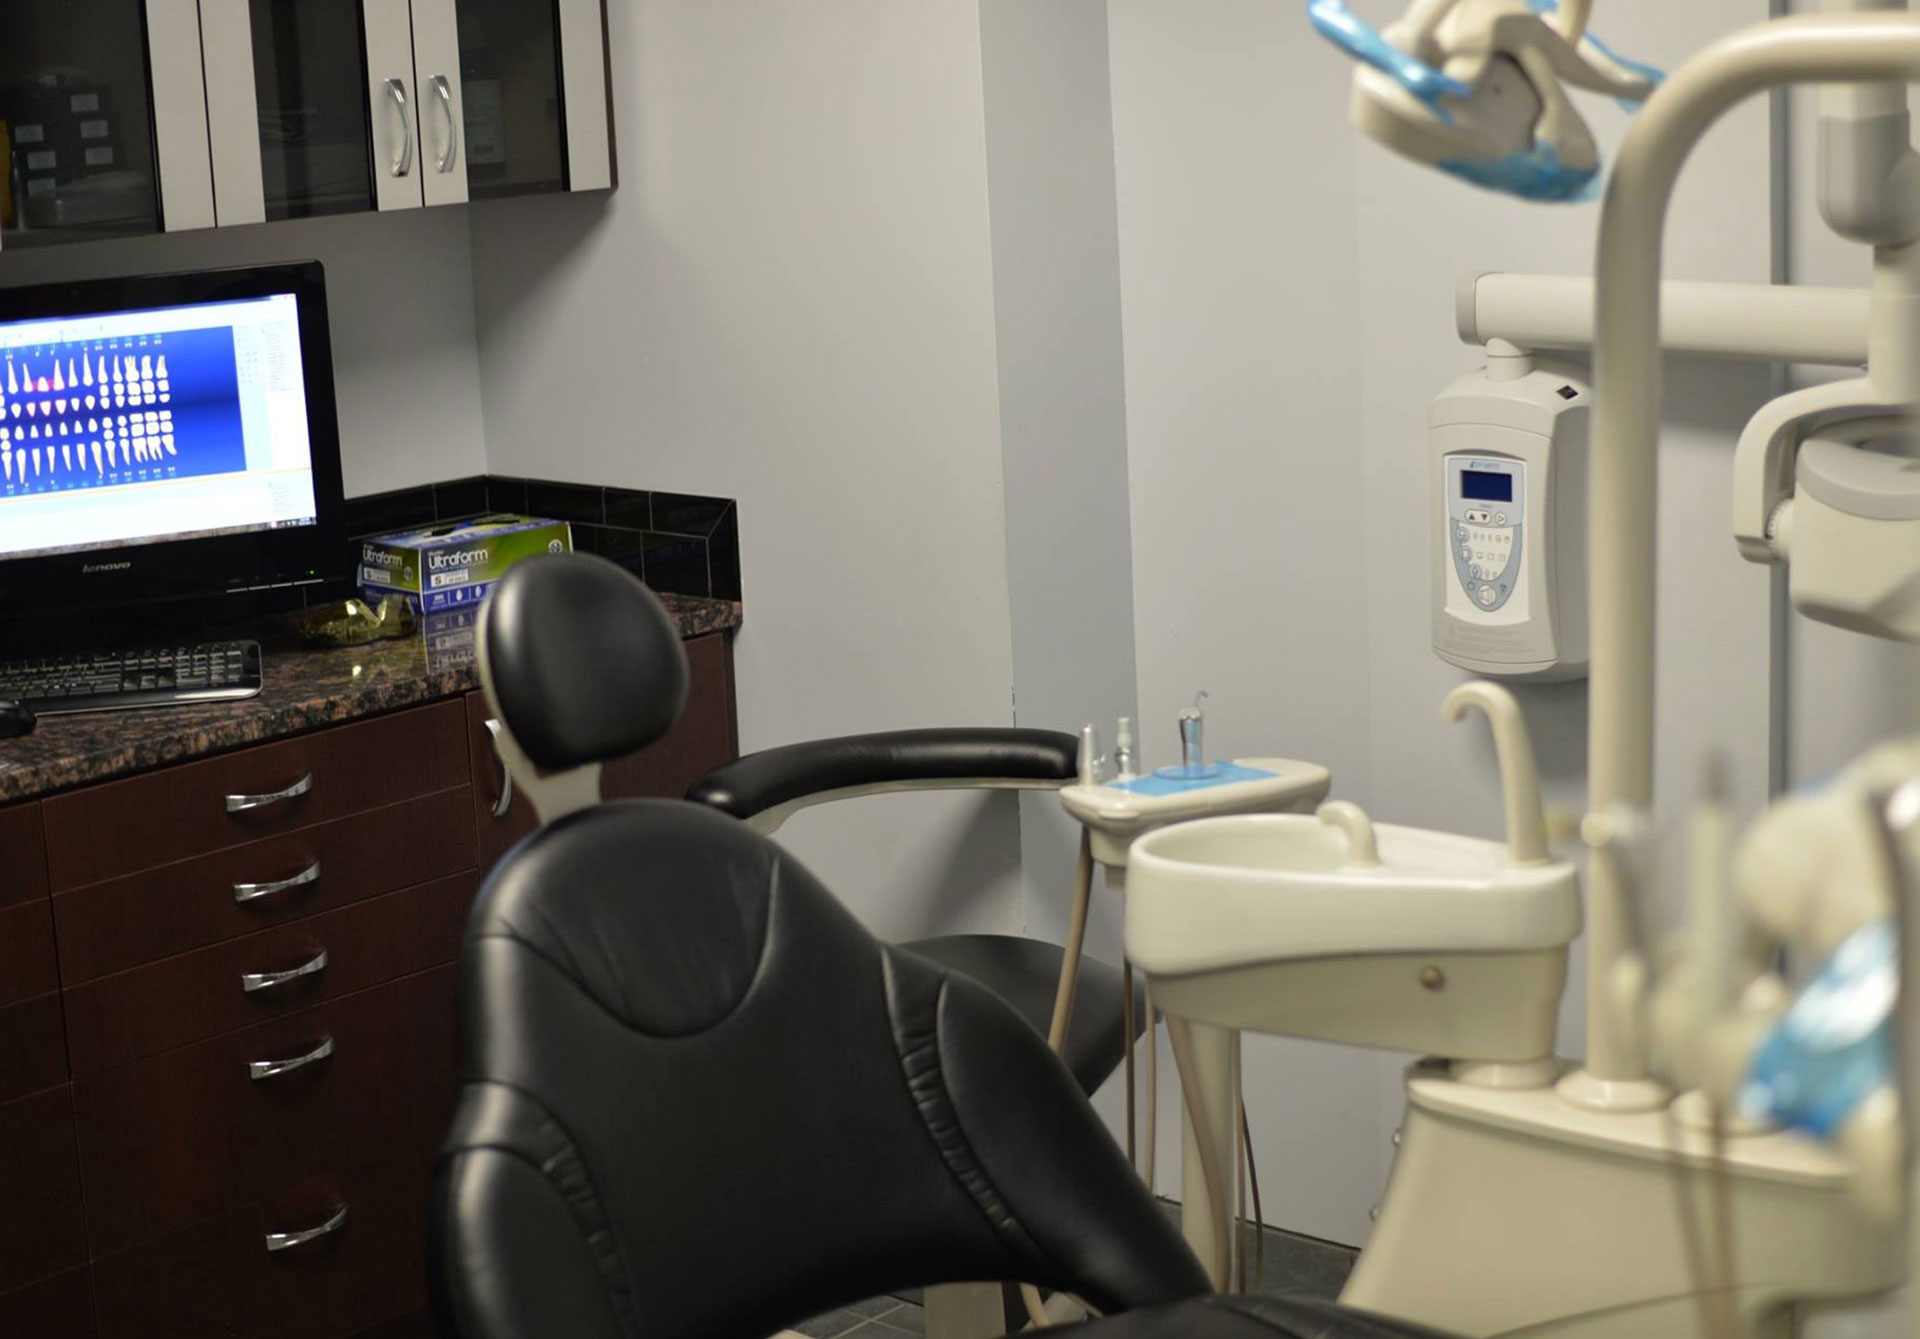 Park Slope Dental Aesthetics | Extractions, Oral Cancer Screening and Cosmetic Dentistry